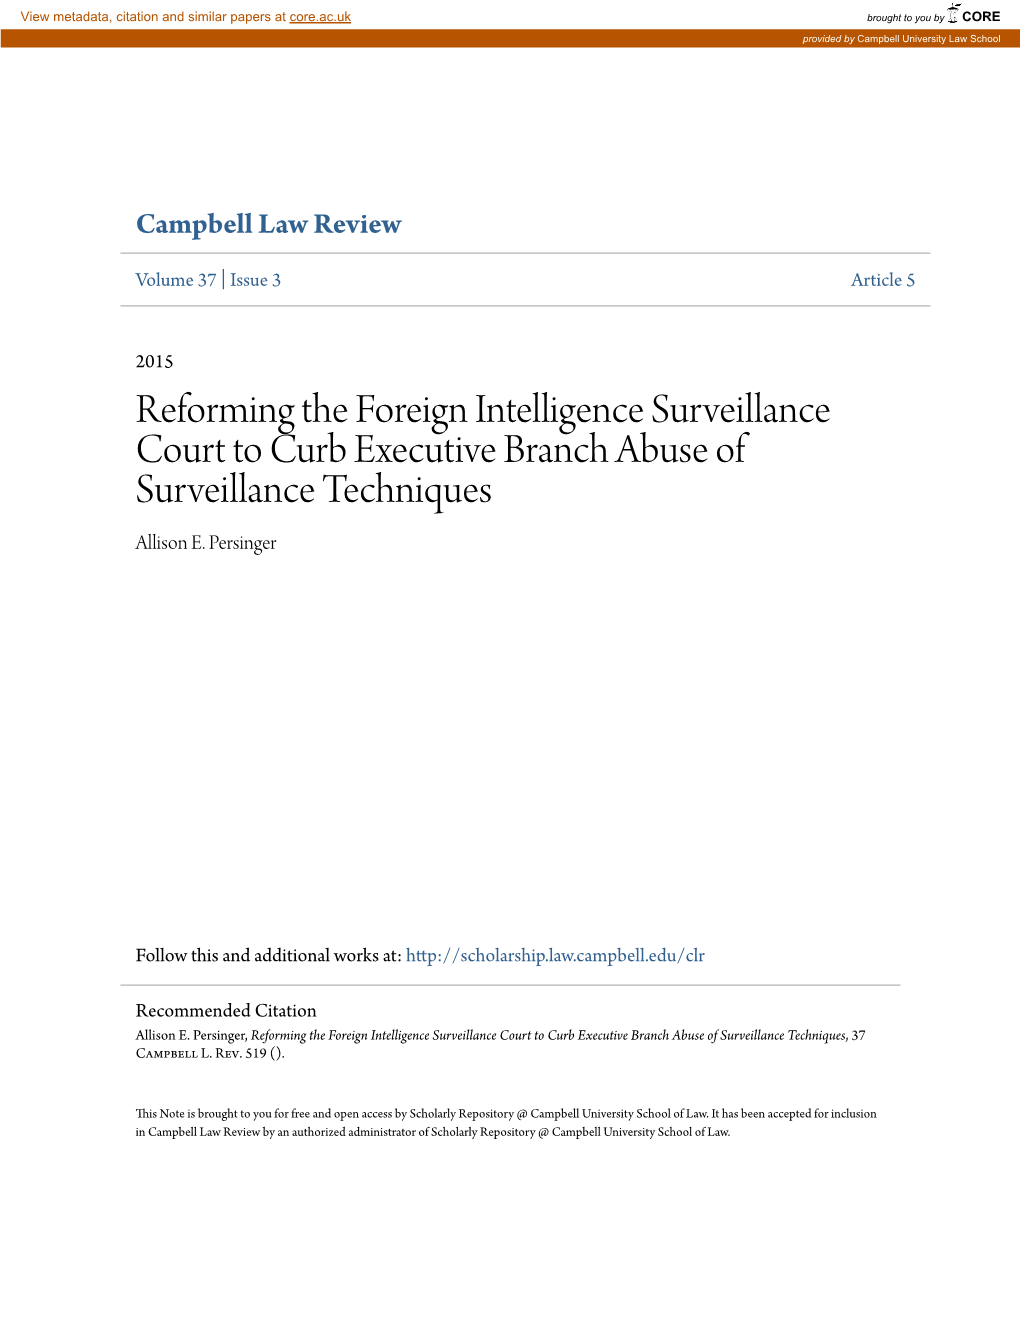 Reforming the Foreign Intelligence Surveillance Court to Curb Executive Branch Abuse of Surveillance Techniques Allison E